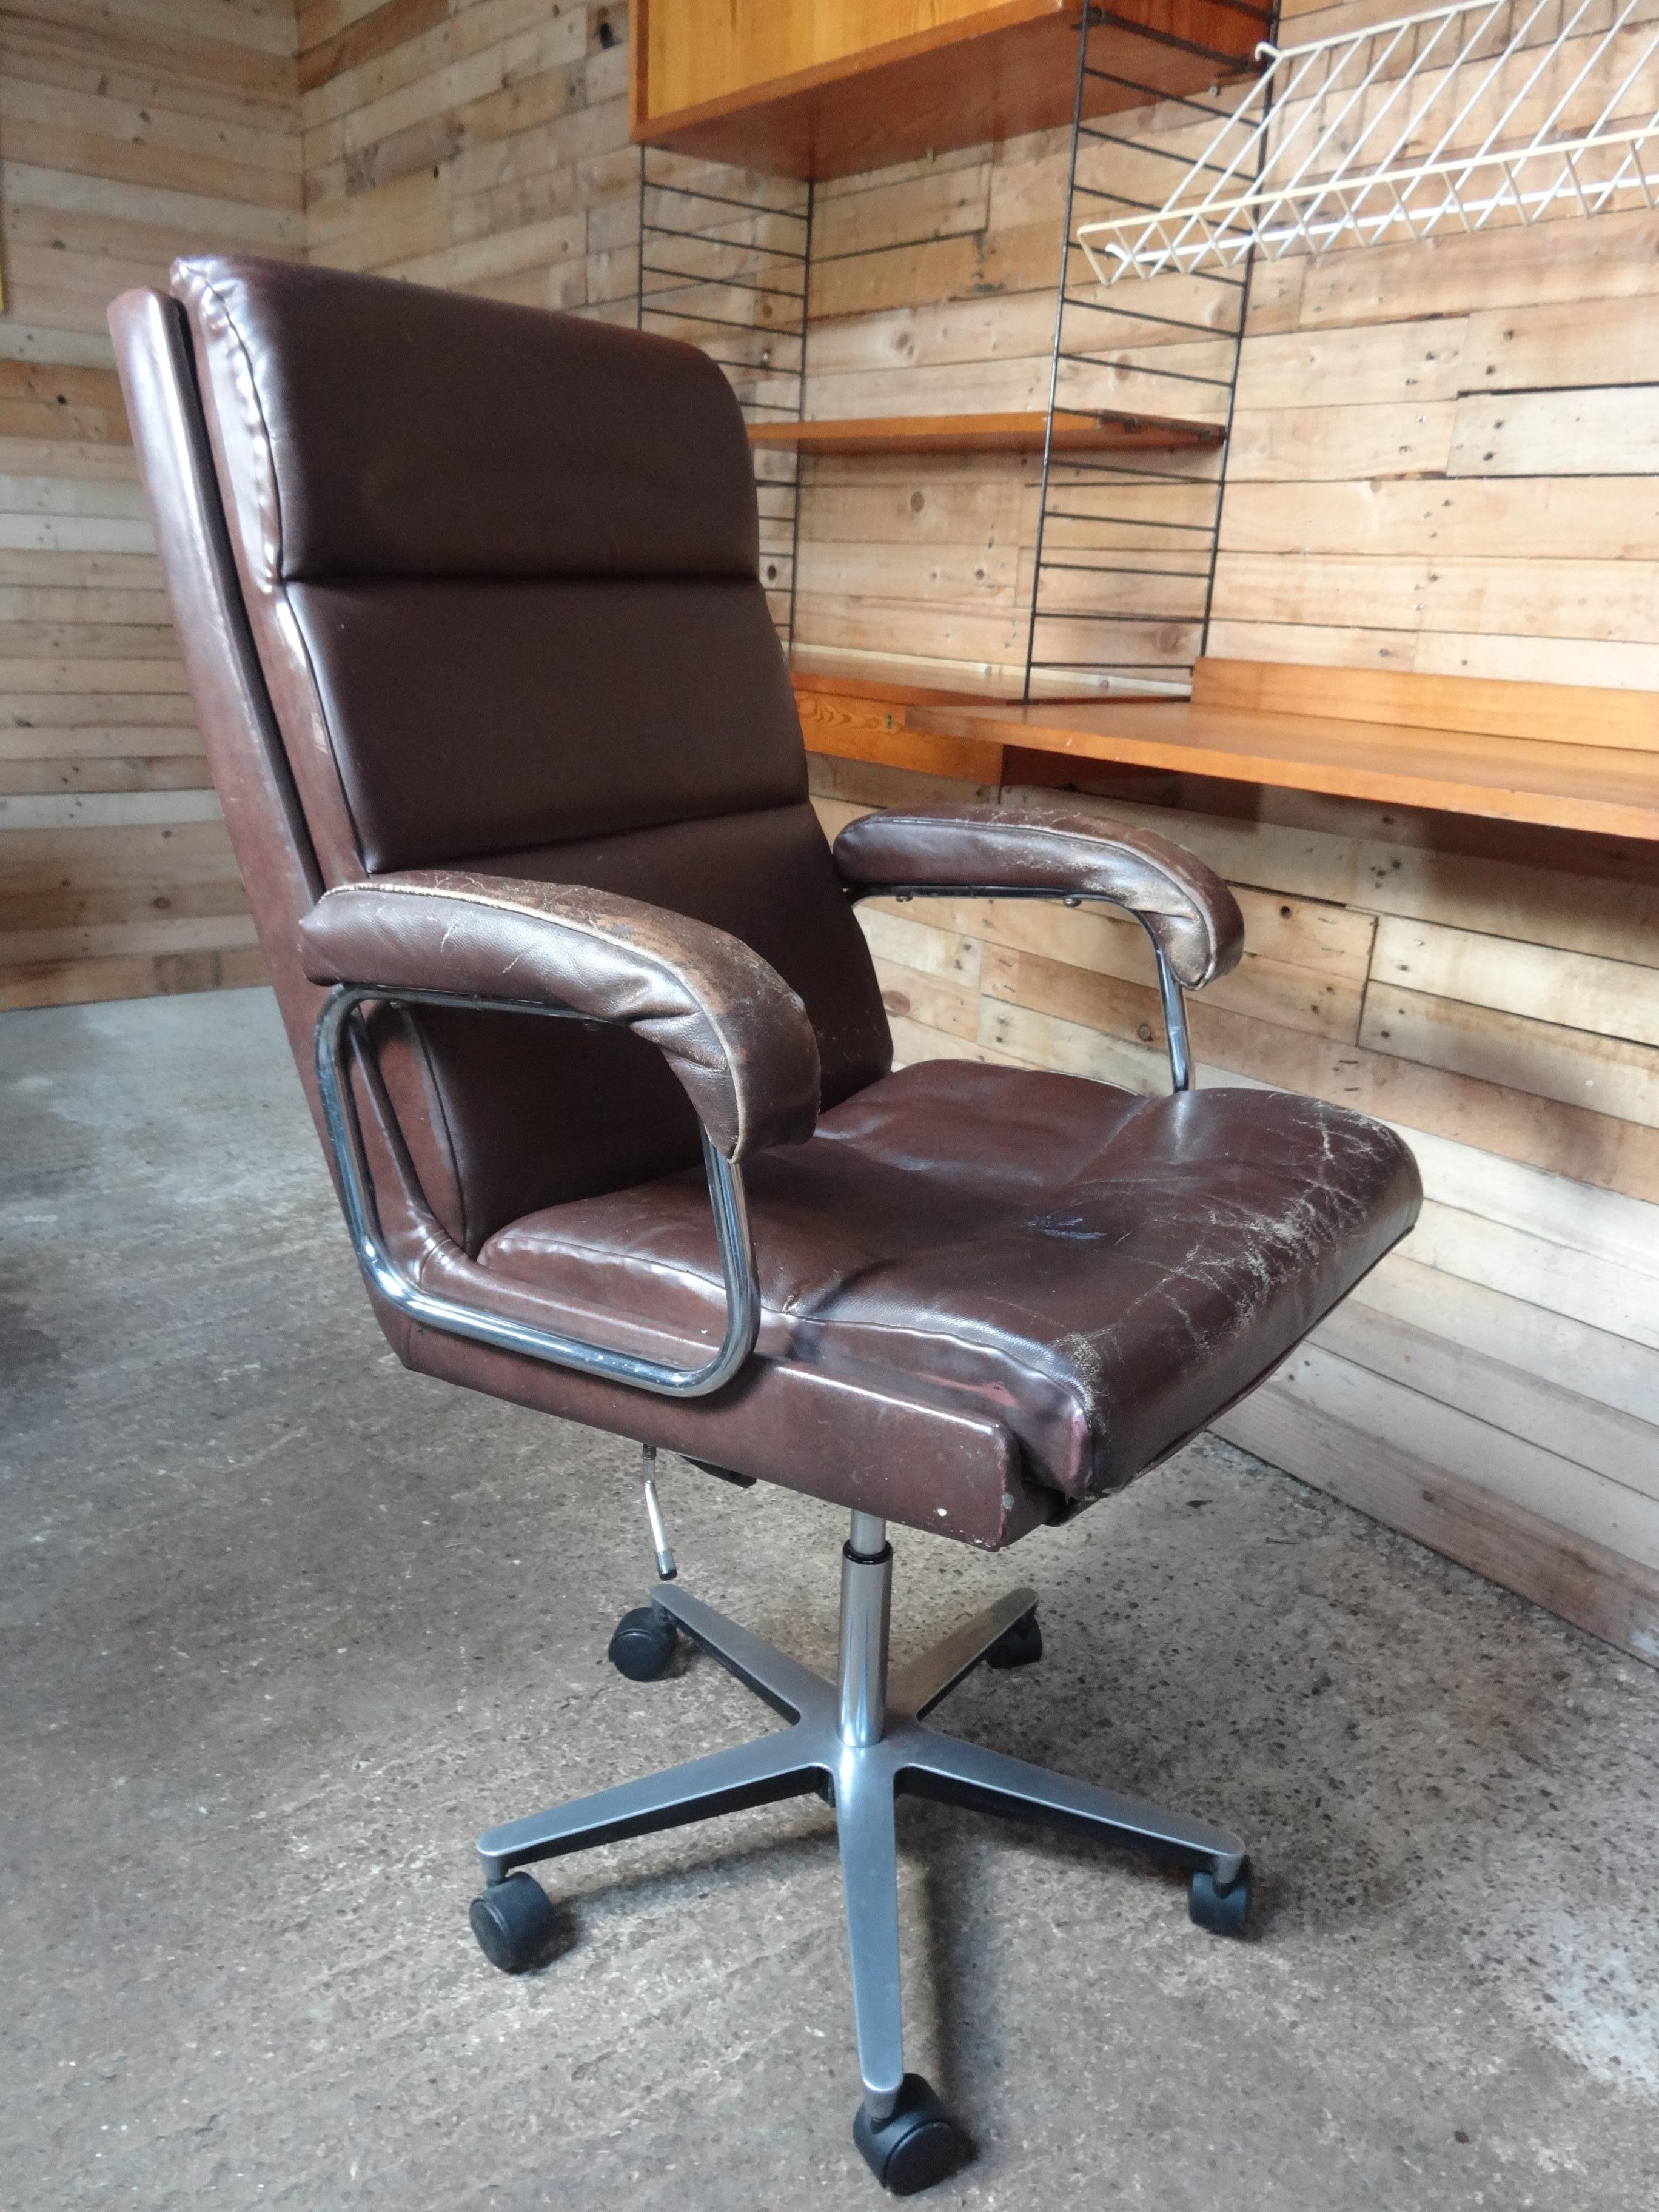 1960 swivel leather retro arm chair

1960 swivel leather retro arm chair, lots of patina on the leather which makes this chair outstanding. very much in the syle of De Sede.

Measures: Height: 116 / 108cm, seat height: 60 / 52cm, depth: 80cm,